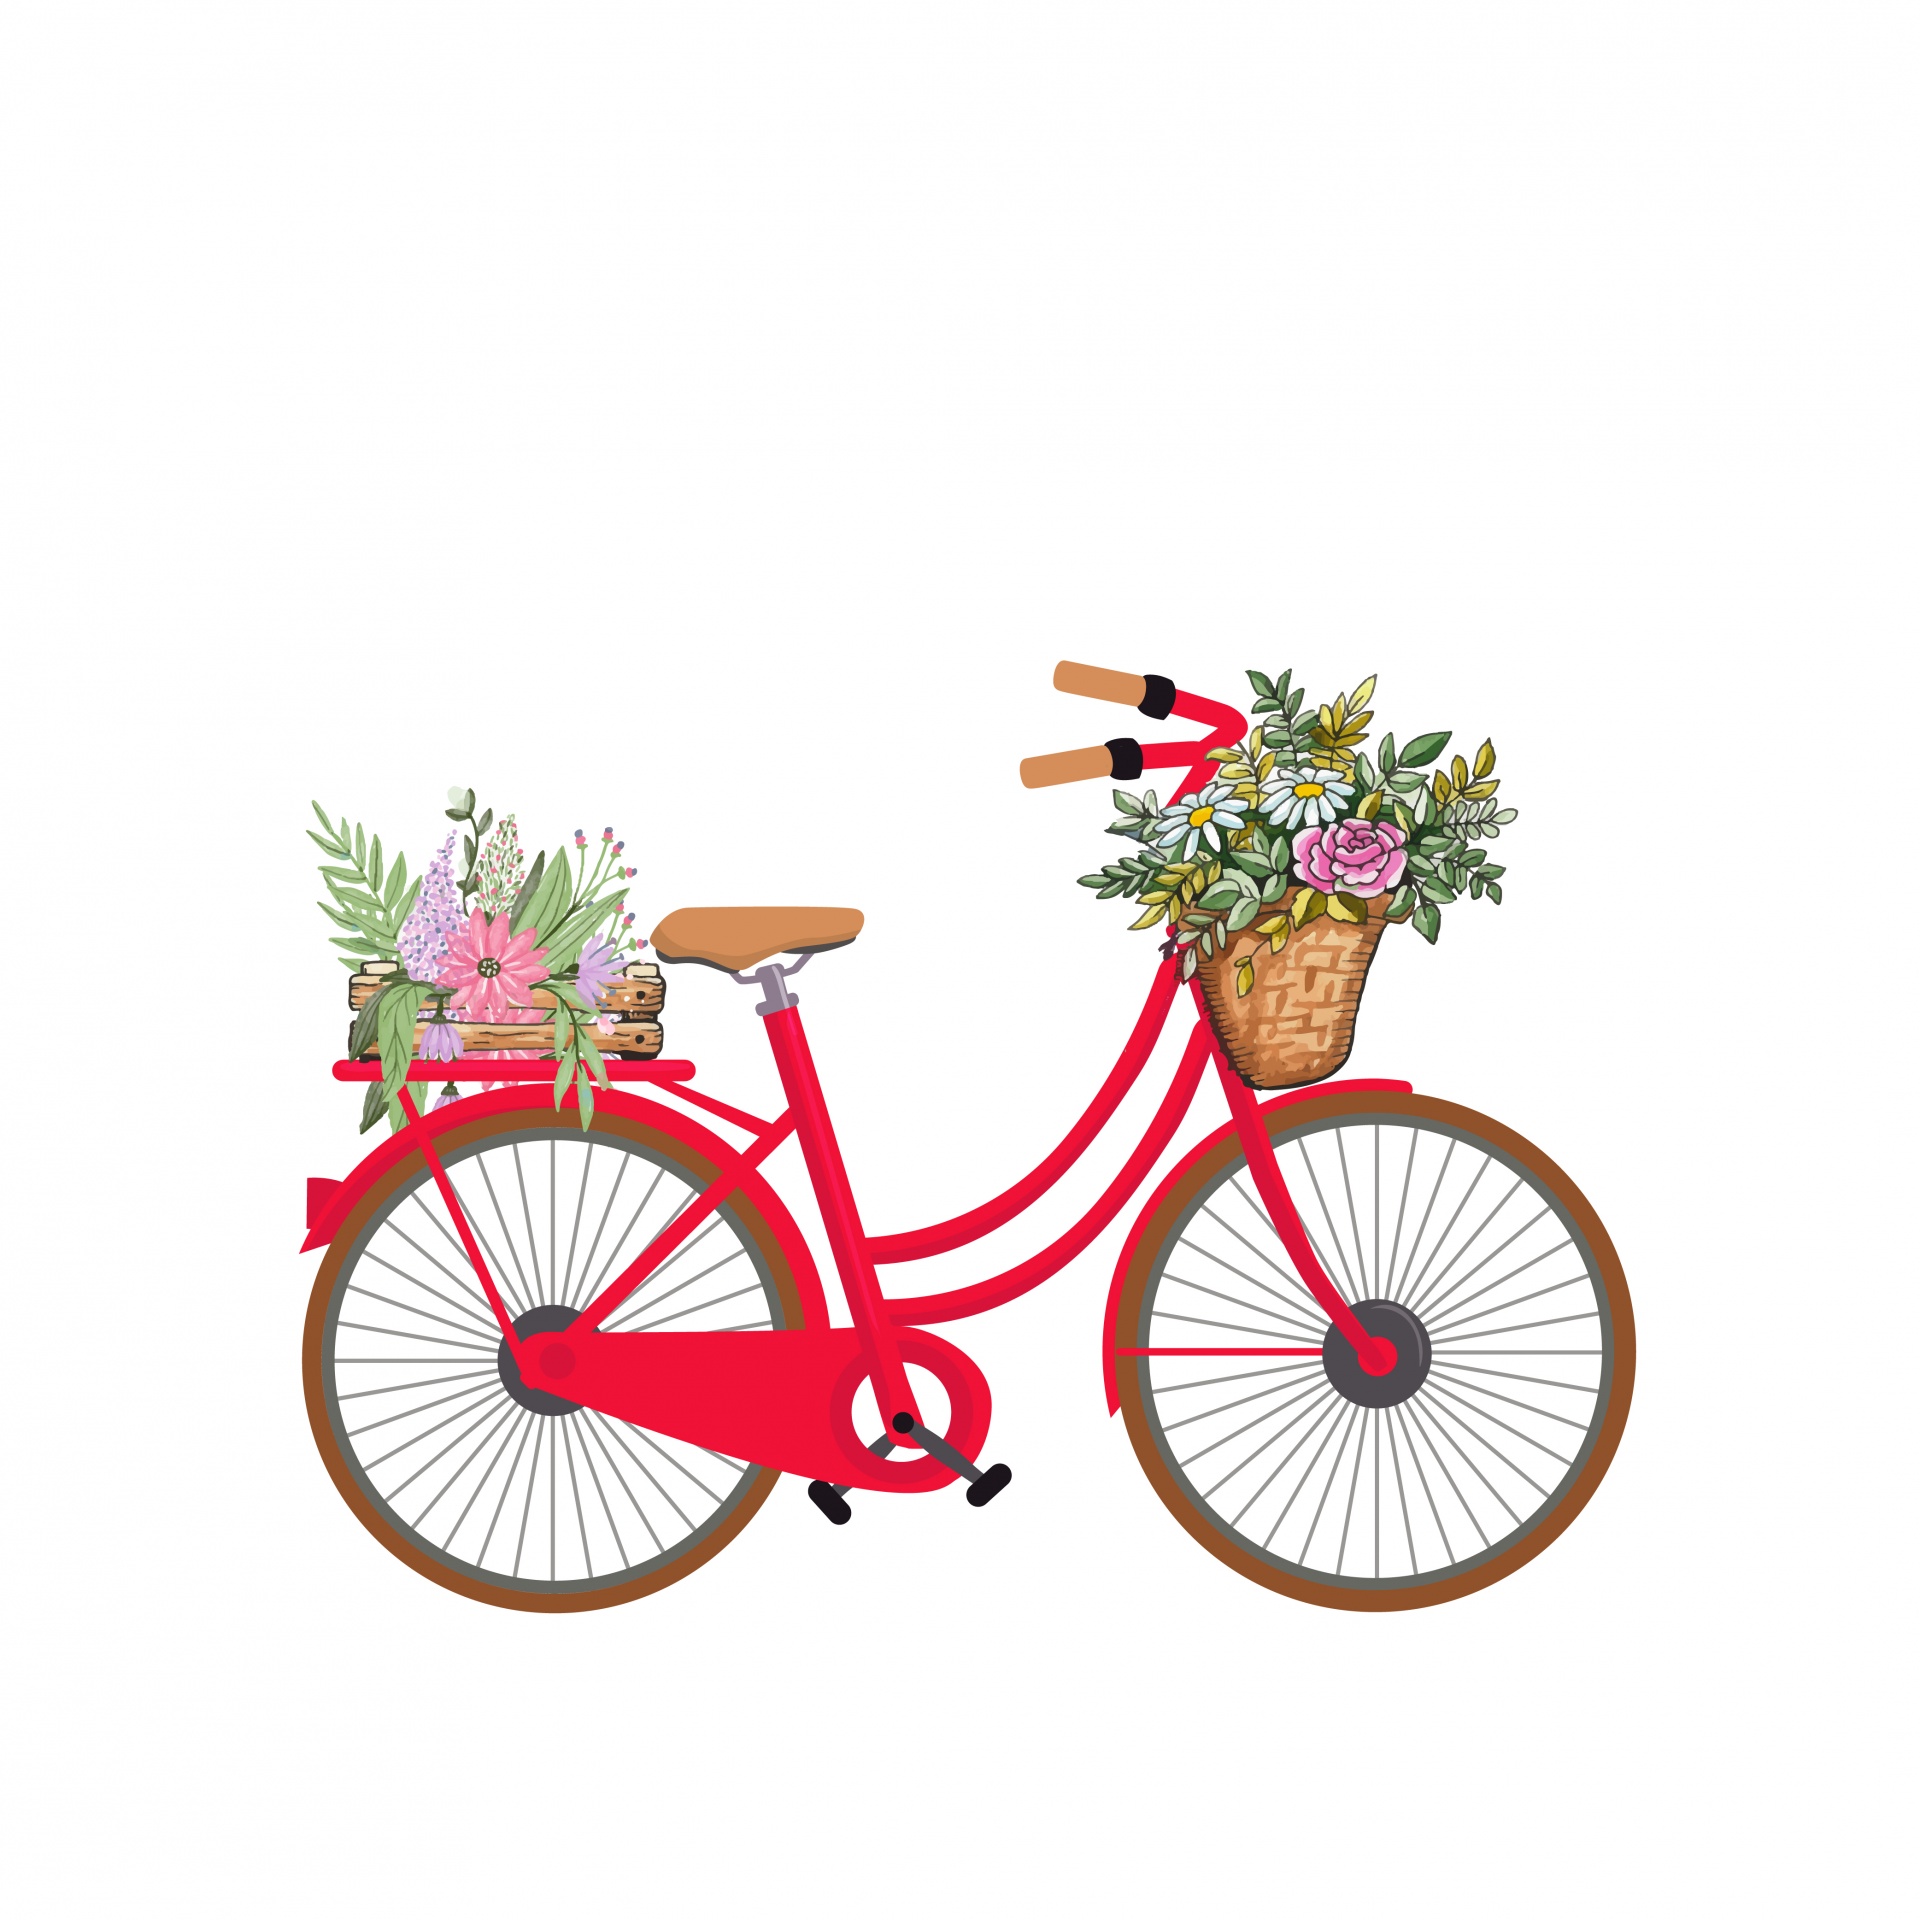 Vintage retro red bike with basket filled will flowers illustration clipart